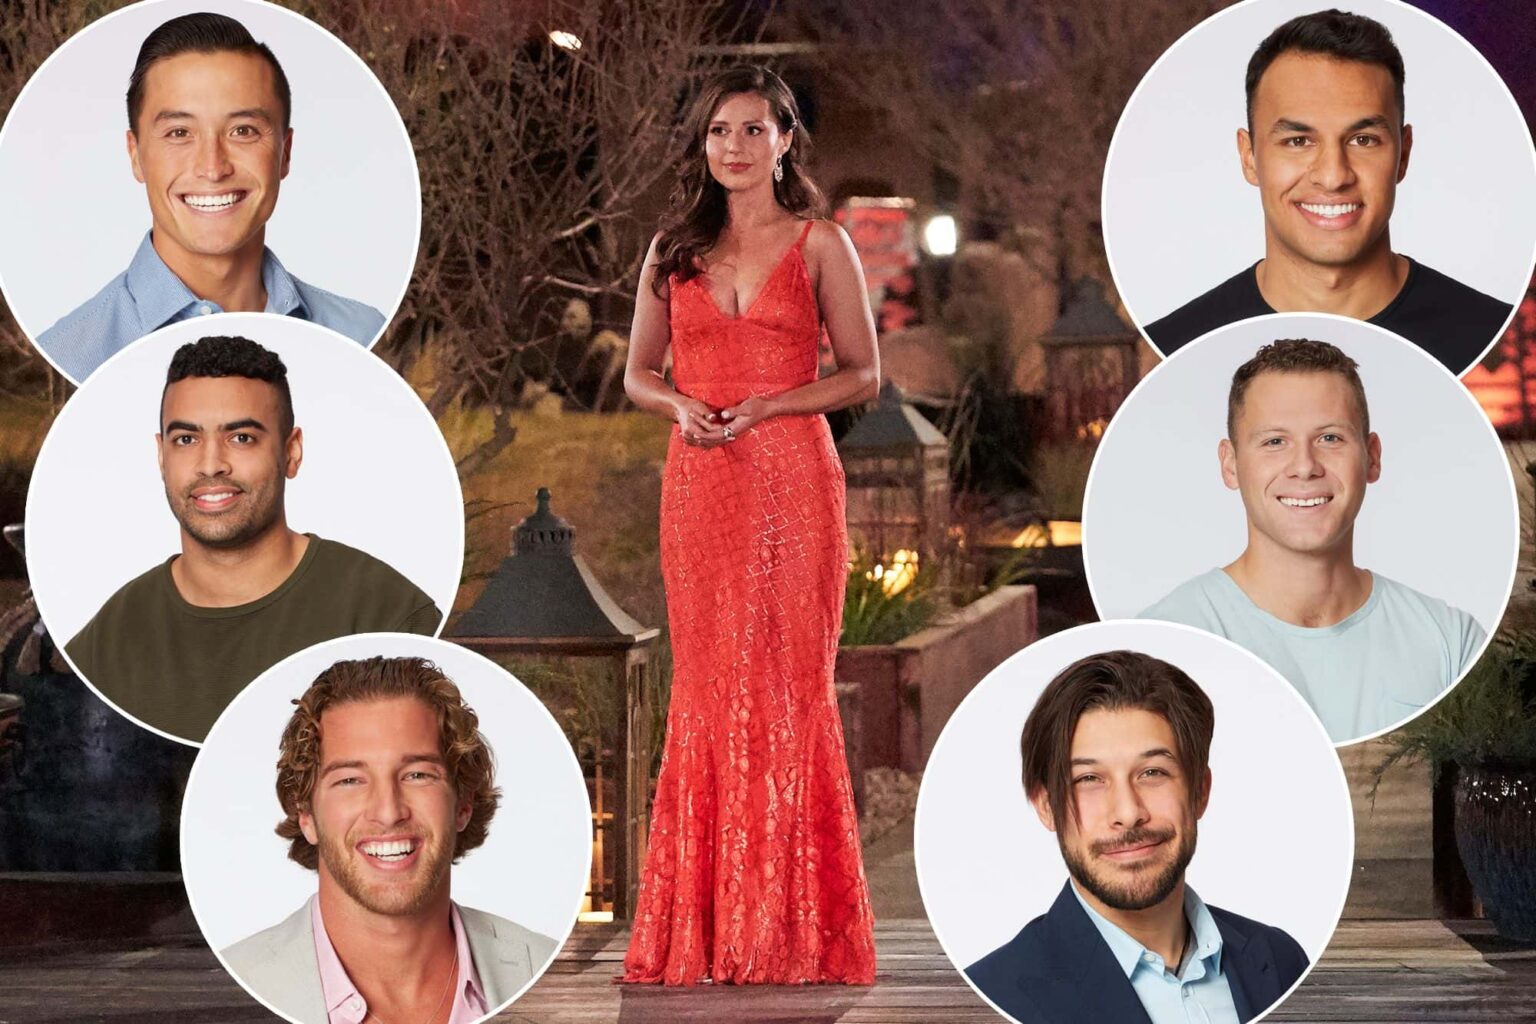 Want spoilers for 'The Bachelorette' season premiere? Here's our recap